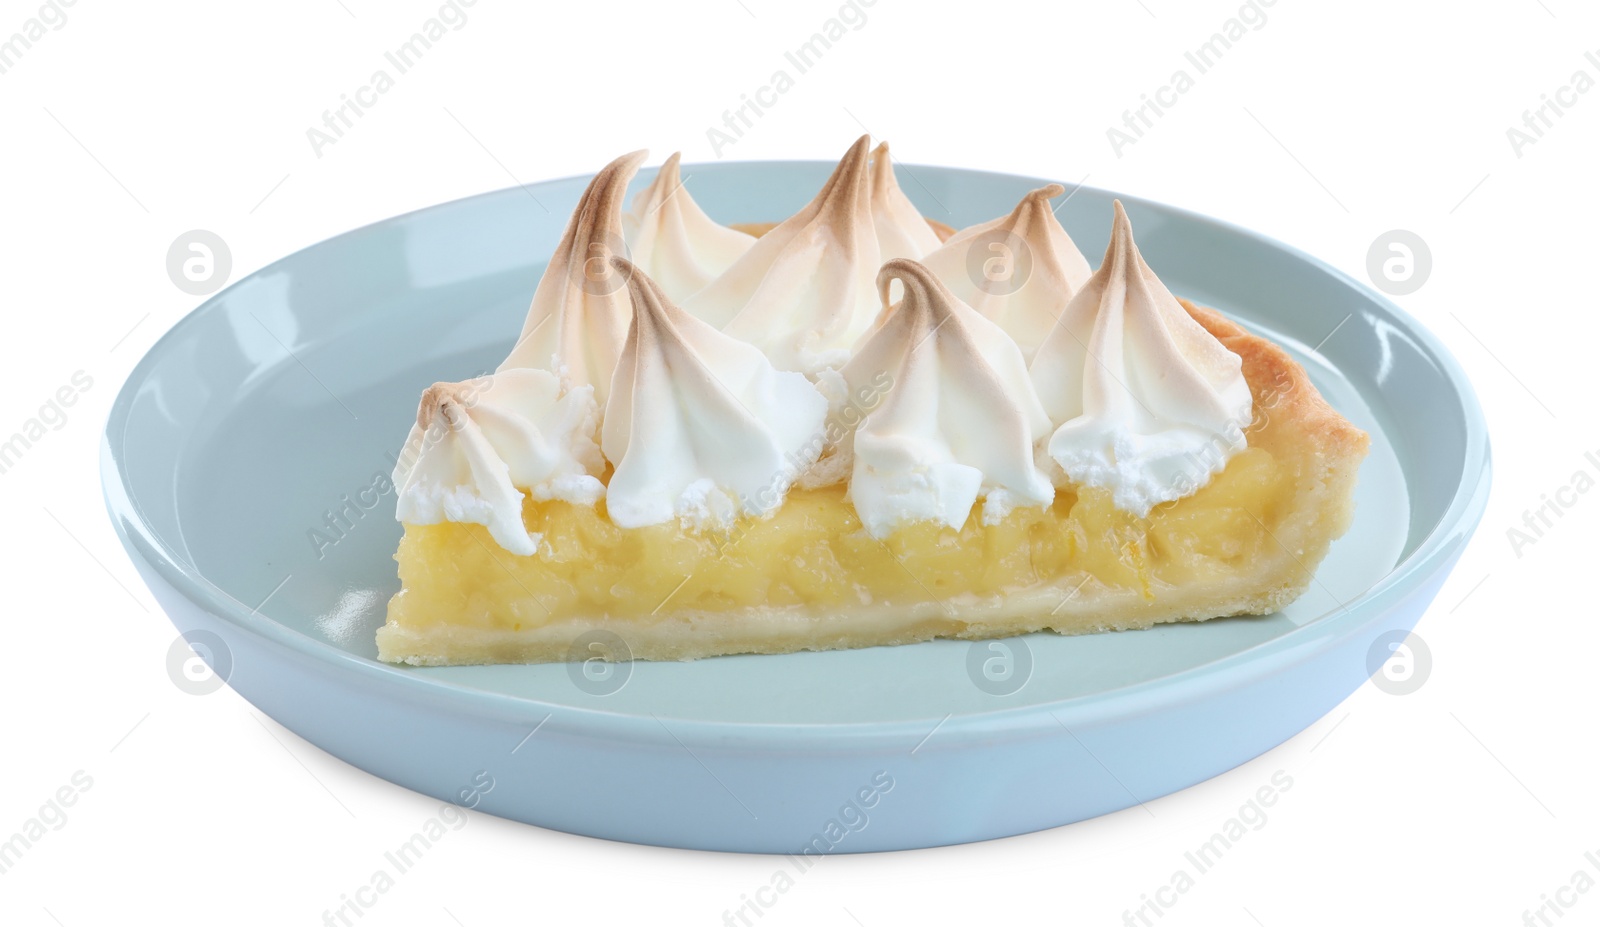 Photo of Piece of delicious lemon meringue pie with plate isolated on white